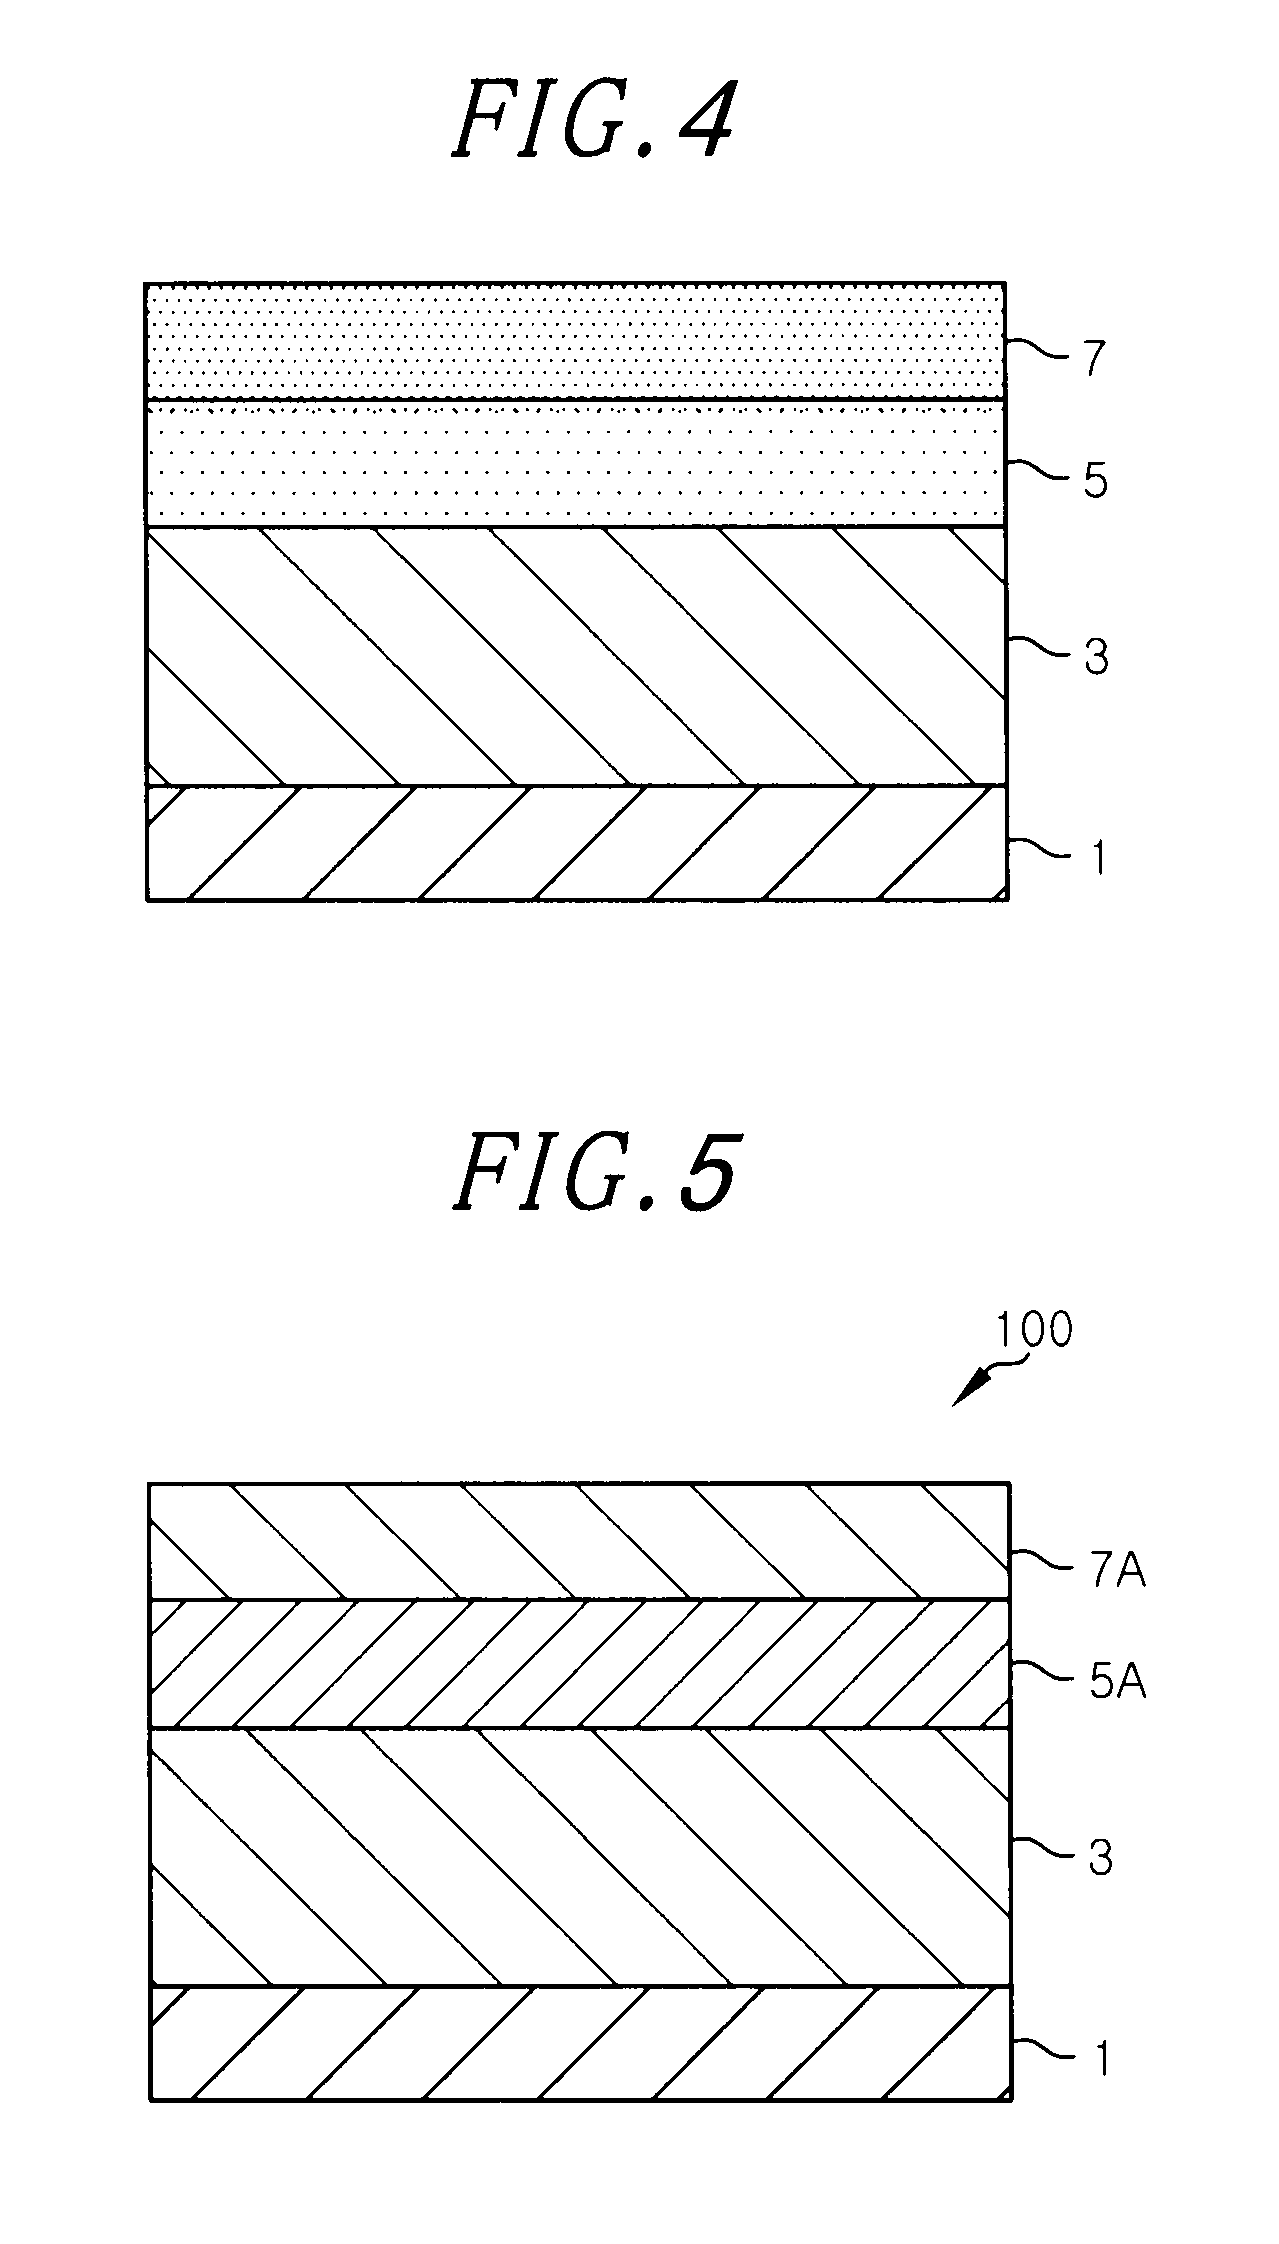 Film forming method, semiconductor device, manufacturing method thereof and substrate processing apparatus therefor